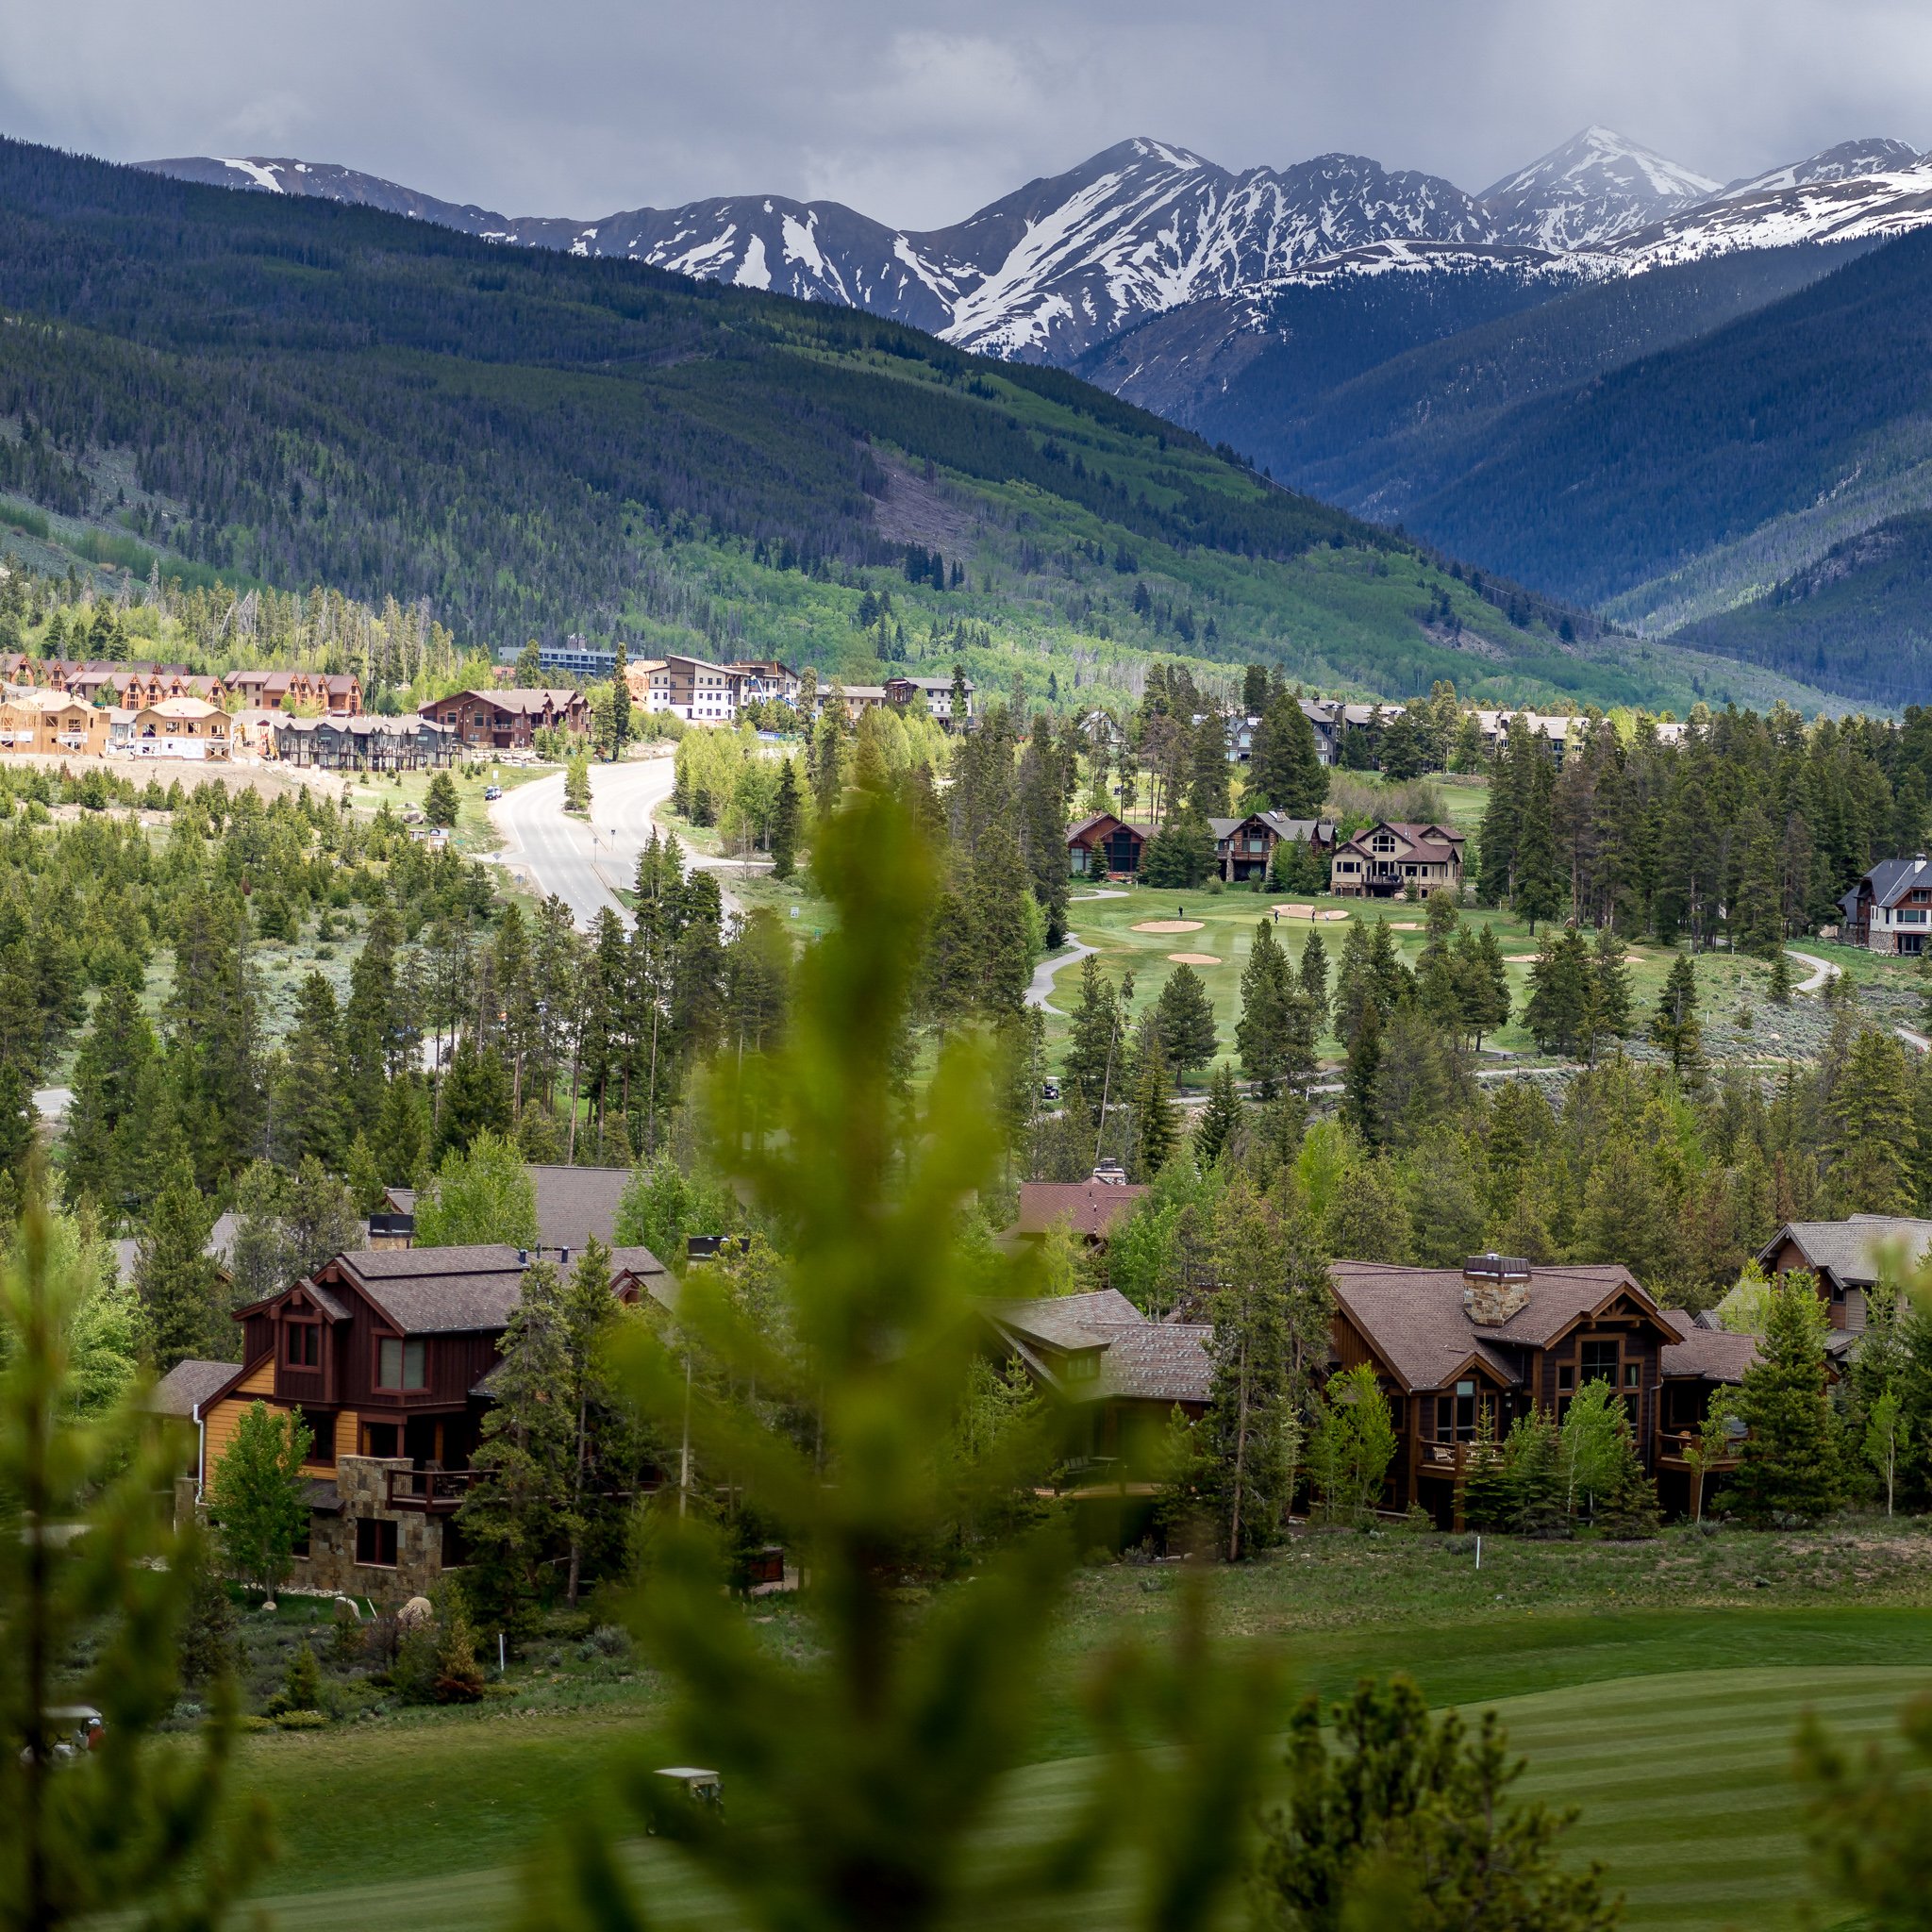 5 Things NOT to do in Keystone, Colorado